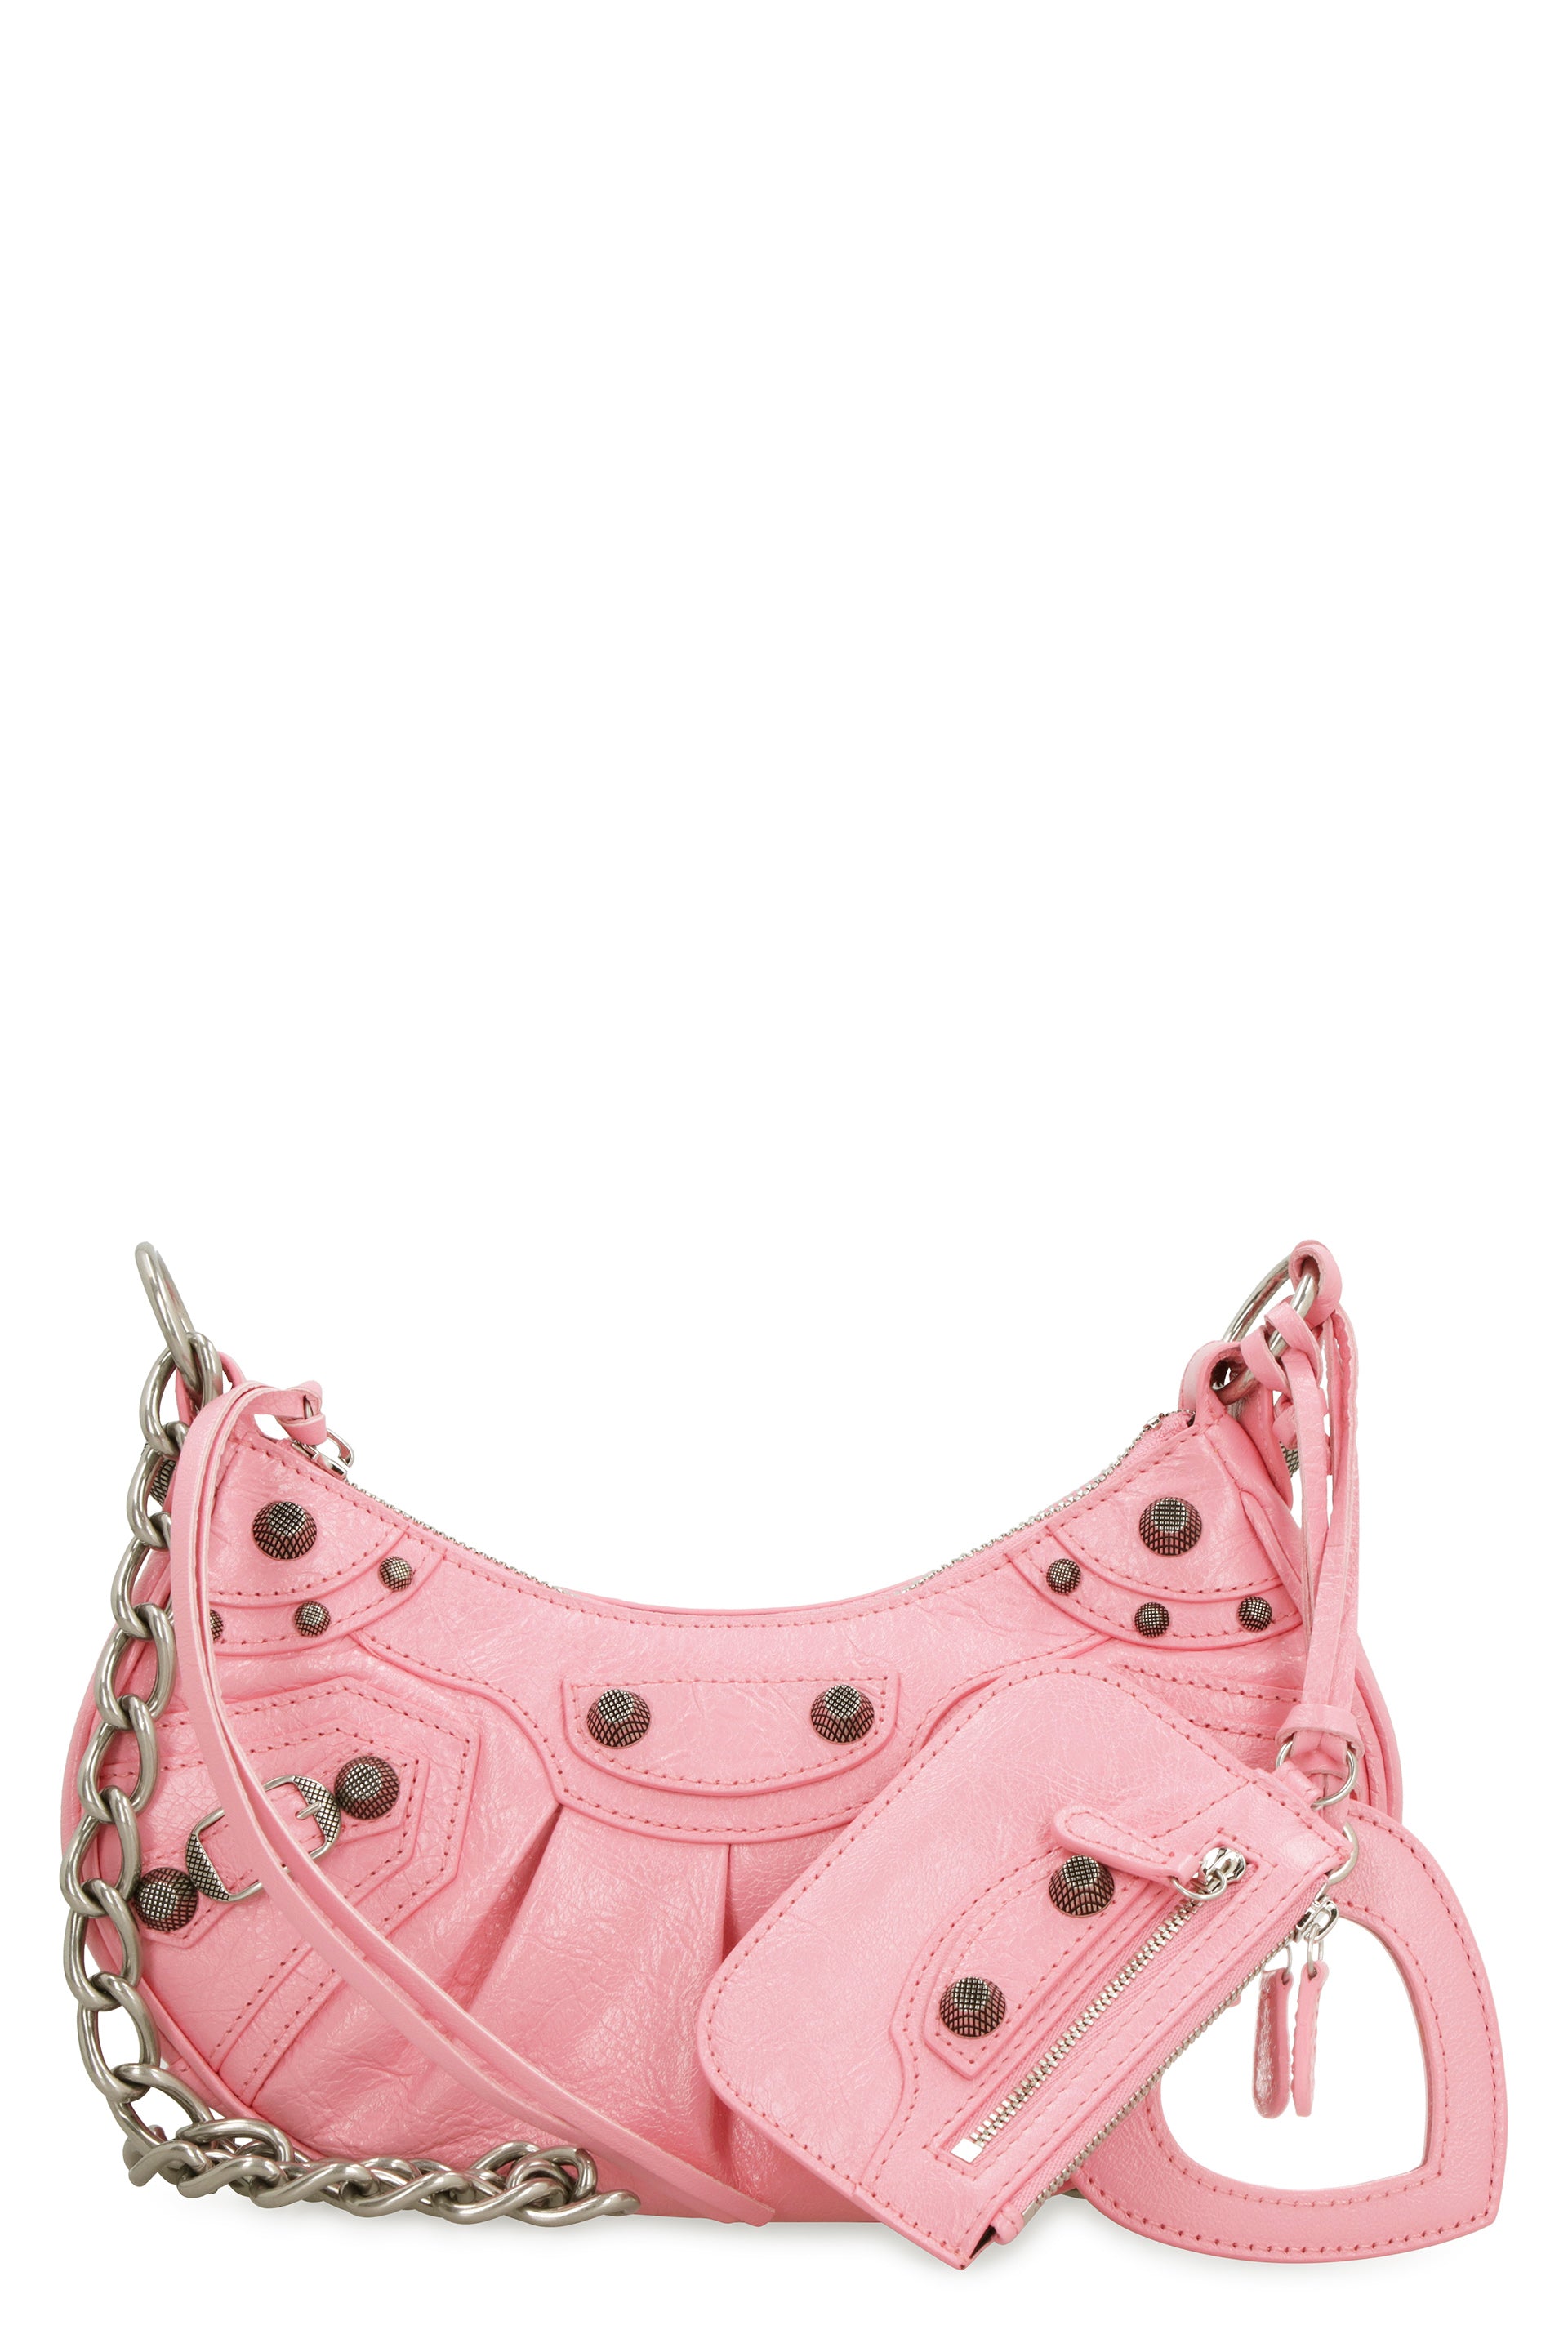 Balenciaga Pink Leather Crossbody Bag With Metal Studs And Buckles